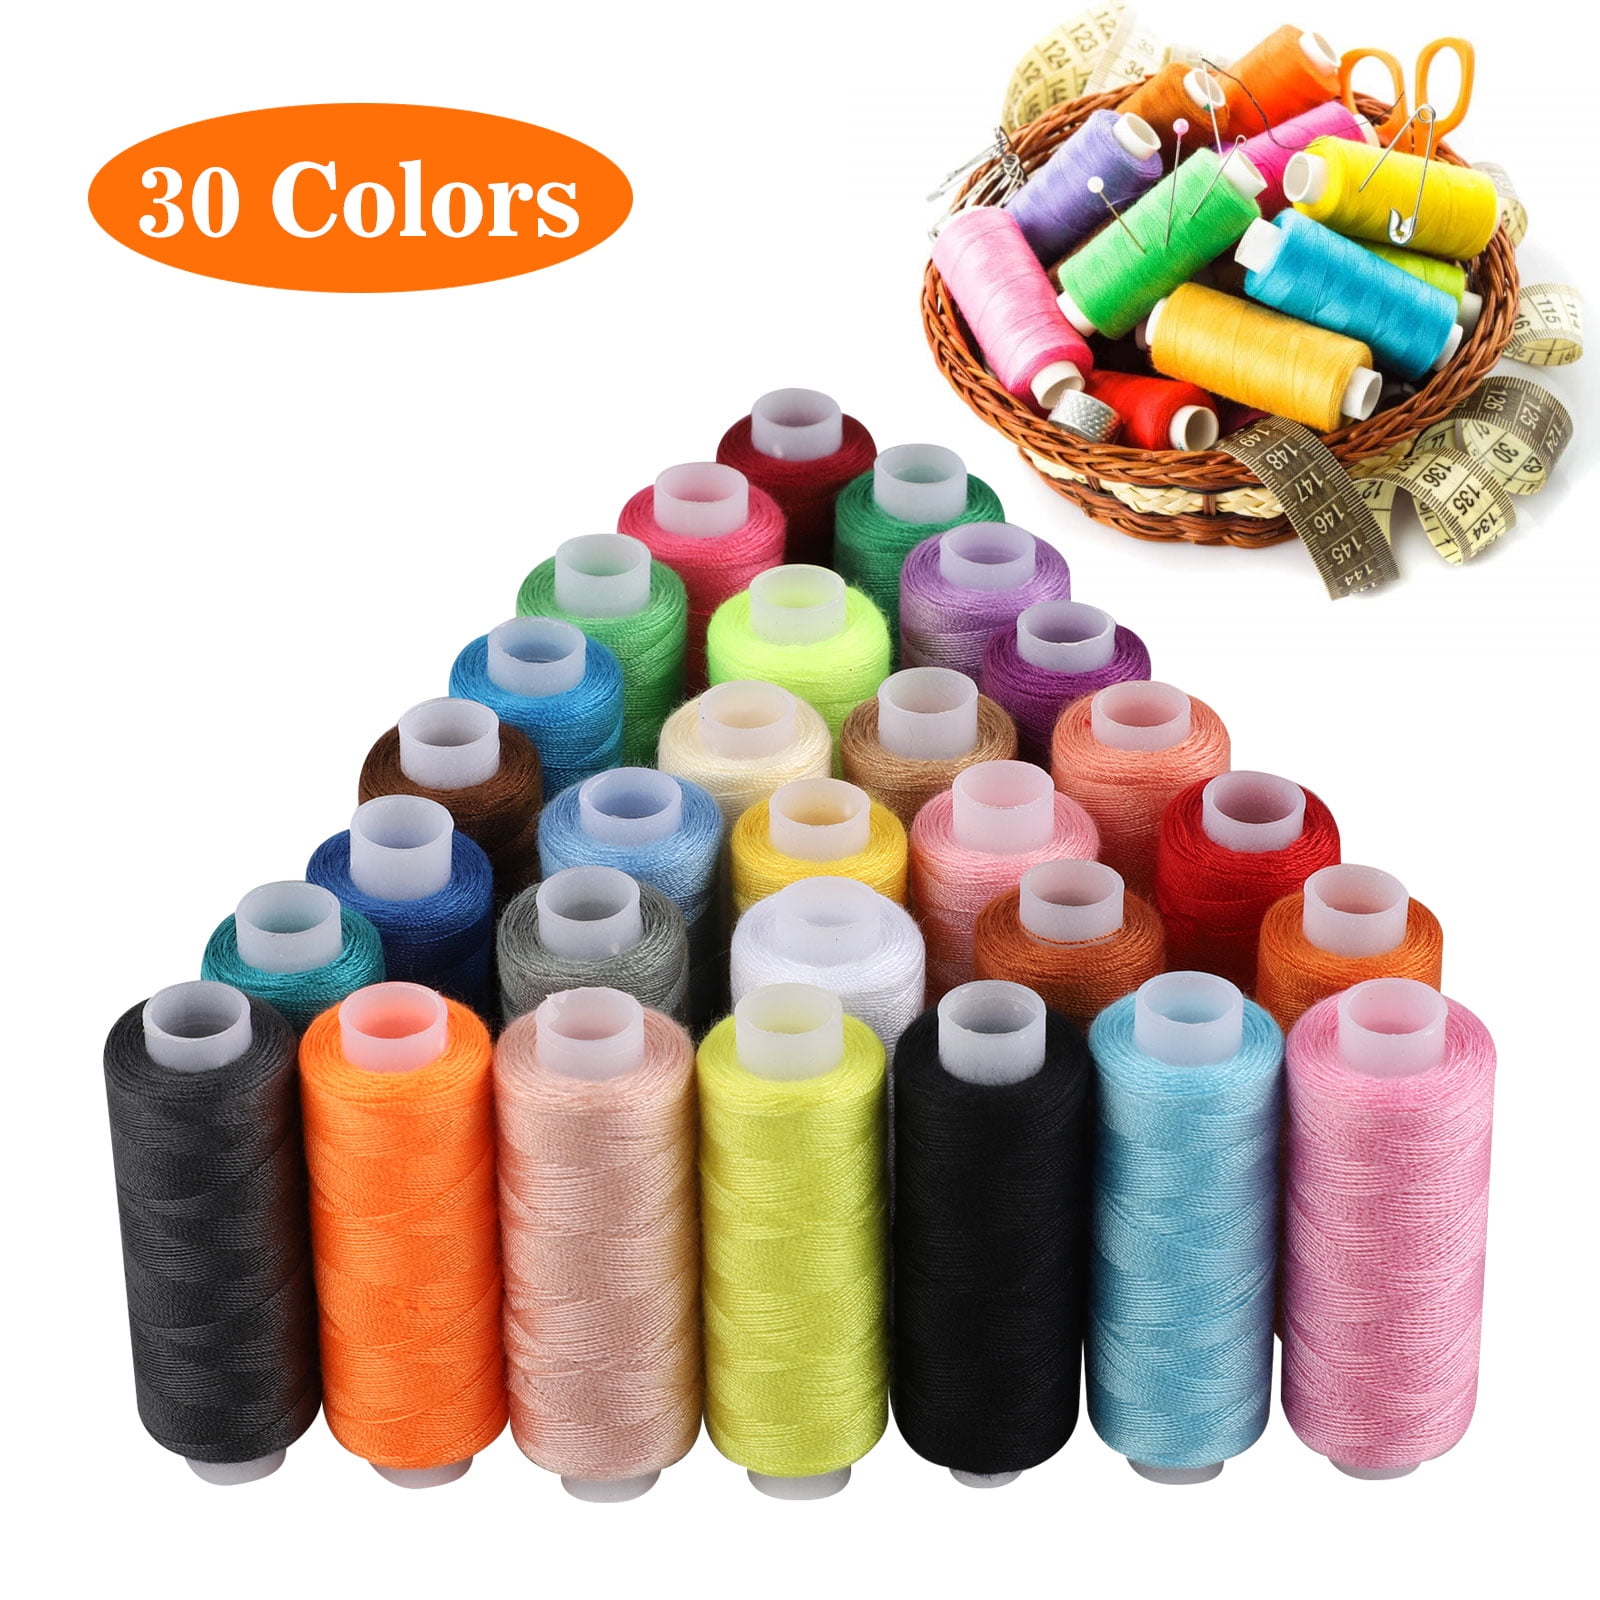  95Pcs 45 Colors Prewound Bobbins Sewing Threads, 400 Yards  Sewing Thread with Case, Polyester Thread Spools Assortment Sewing Thread  Bobbin, Thread for Sewing Hand&Machine DIY and Home